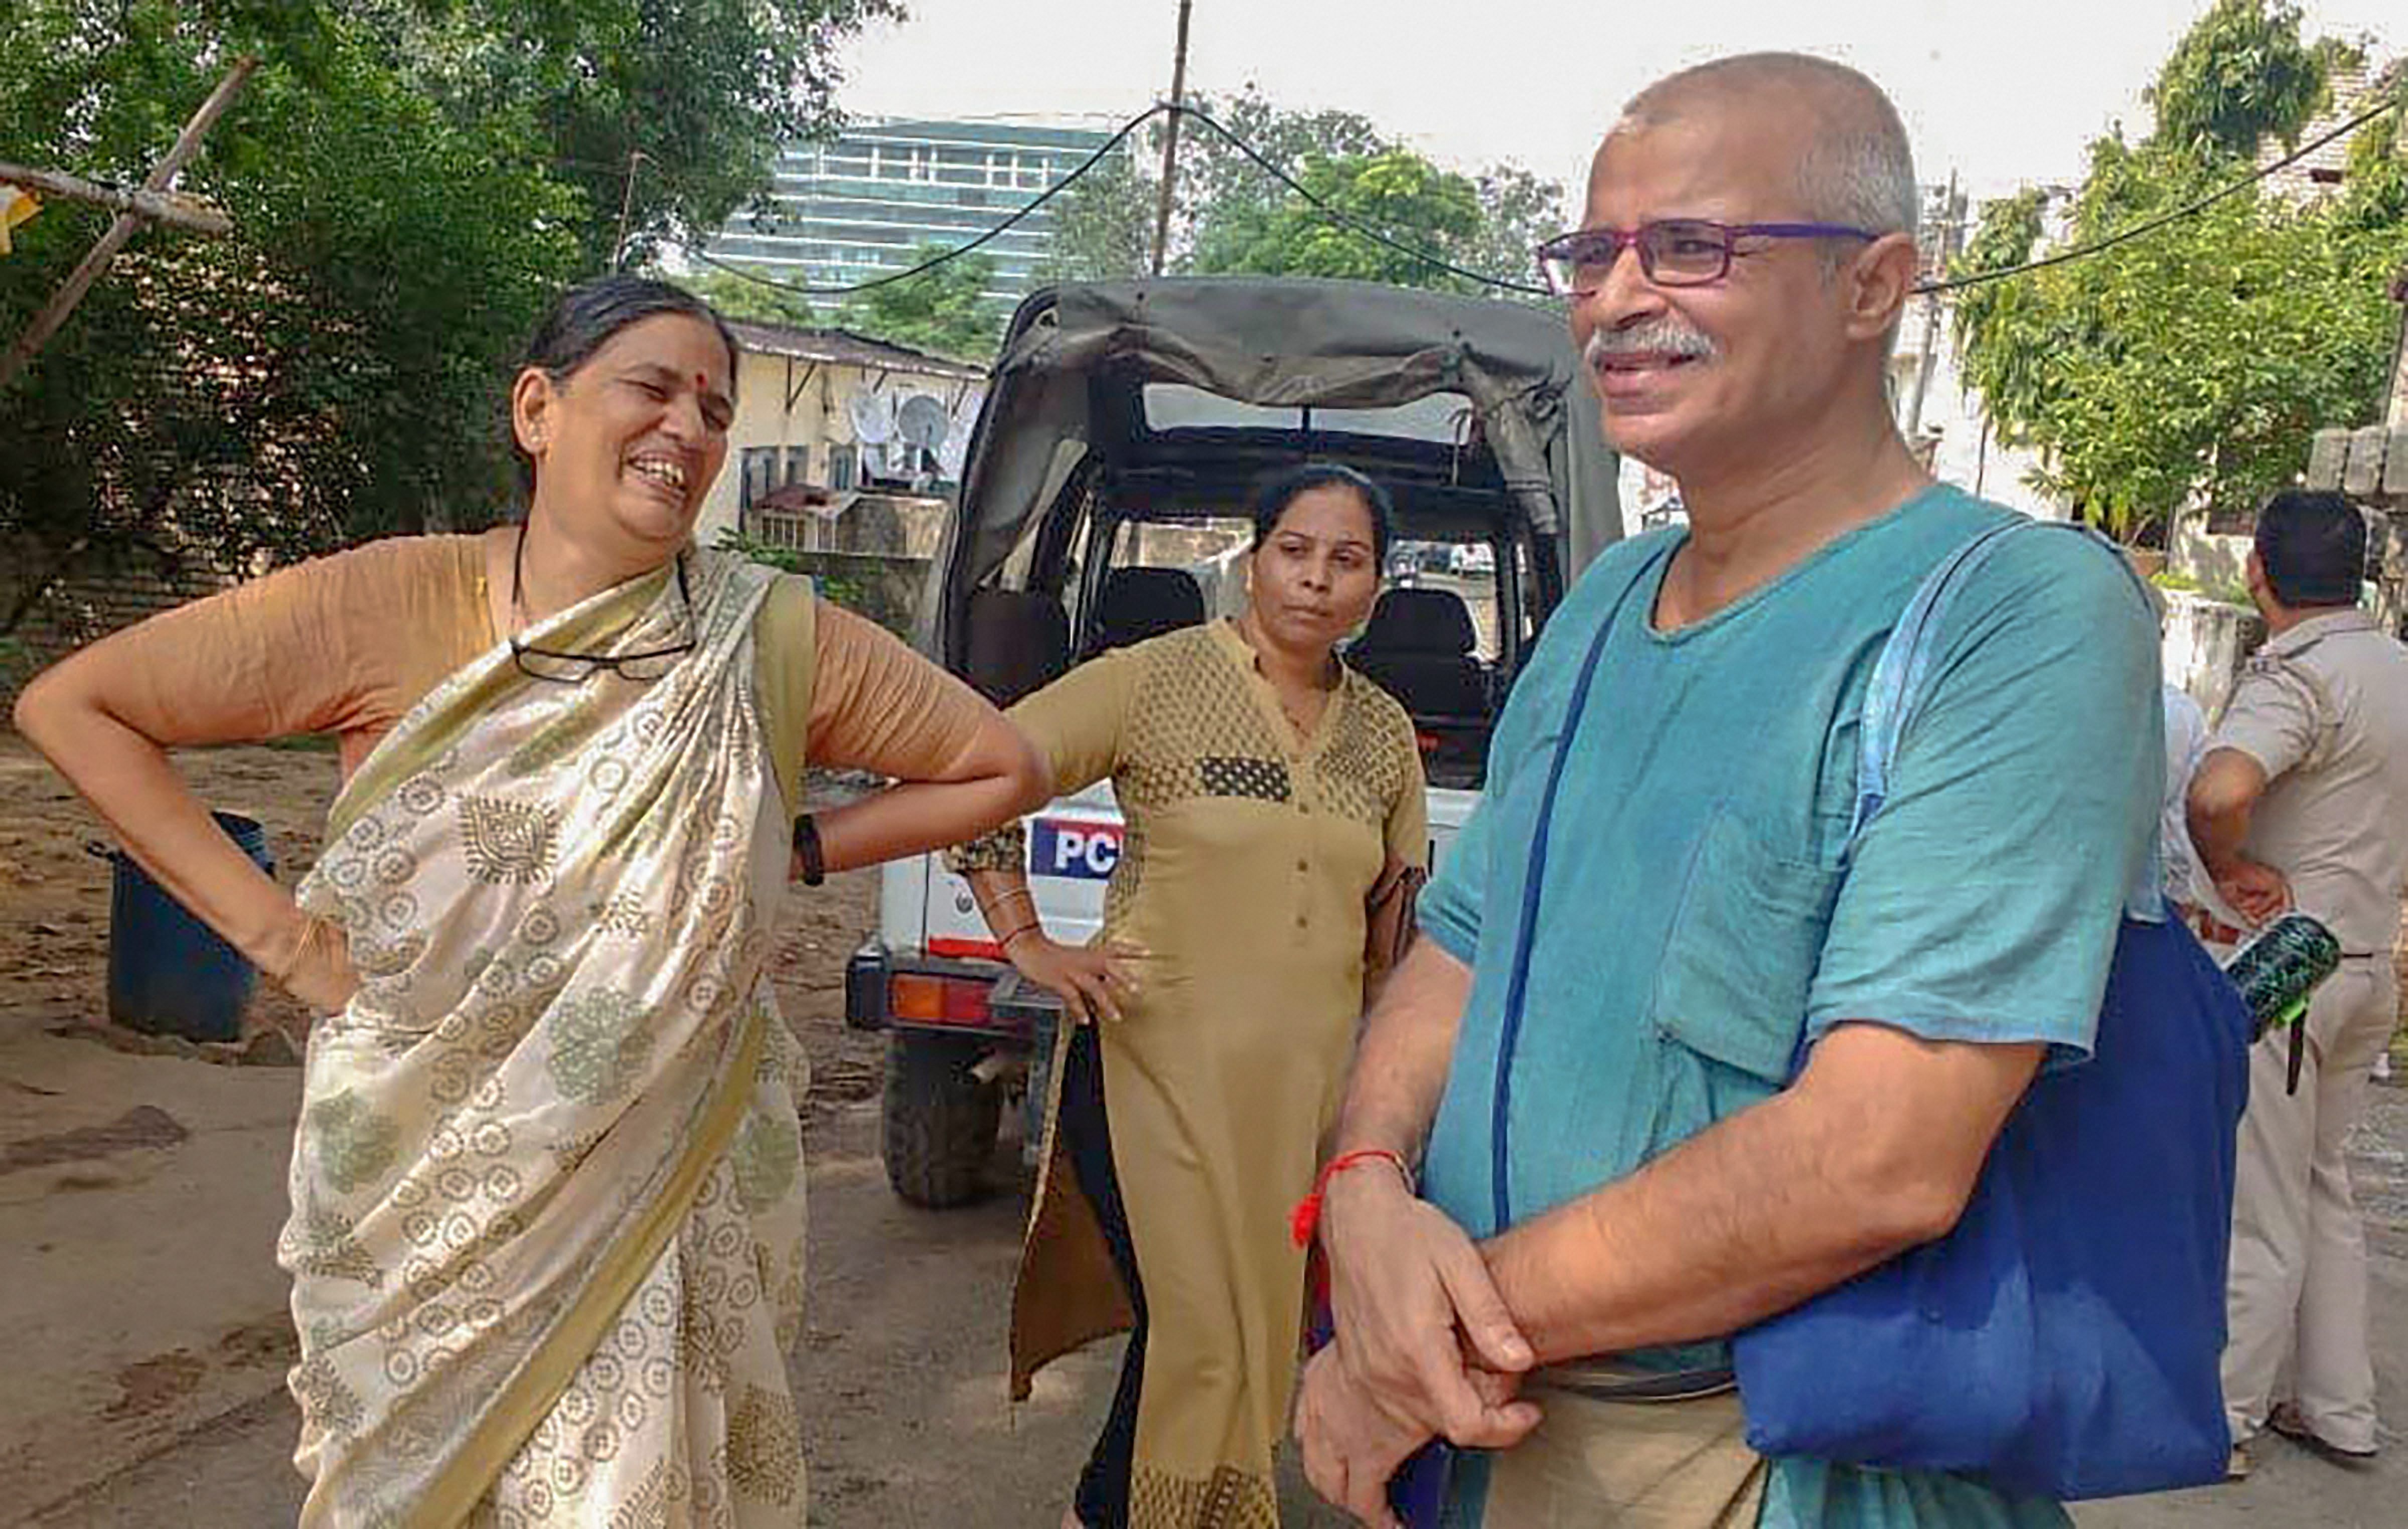 Human rights advocate Sudha Bharadwaj (L) after she was arrested by the Pune police in connection with the Bhima Koregaon violence, in Faridabad on August 28, 2018. PTI file photo